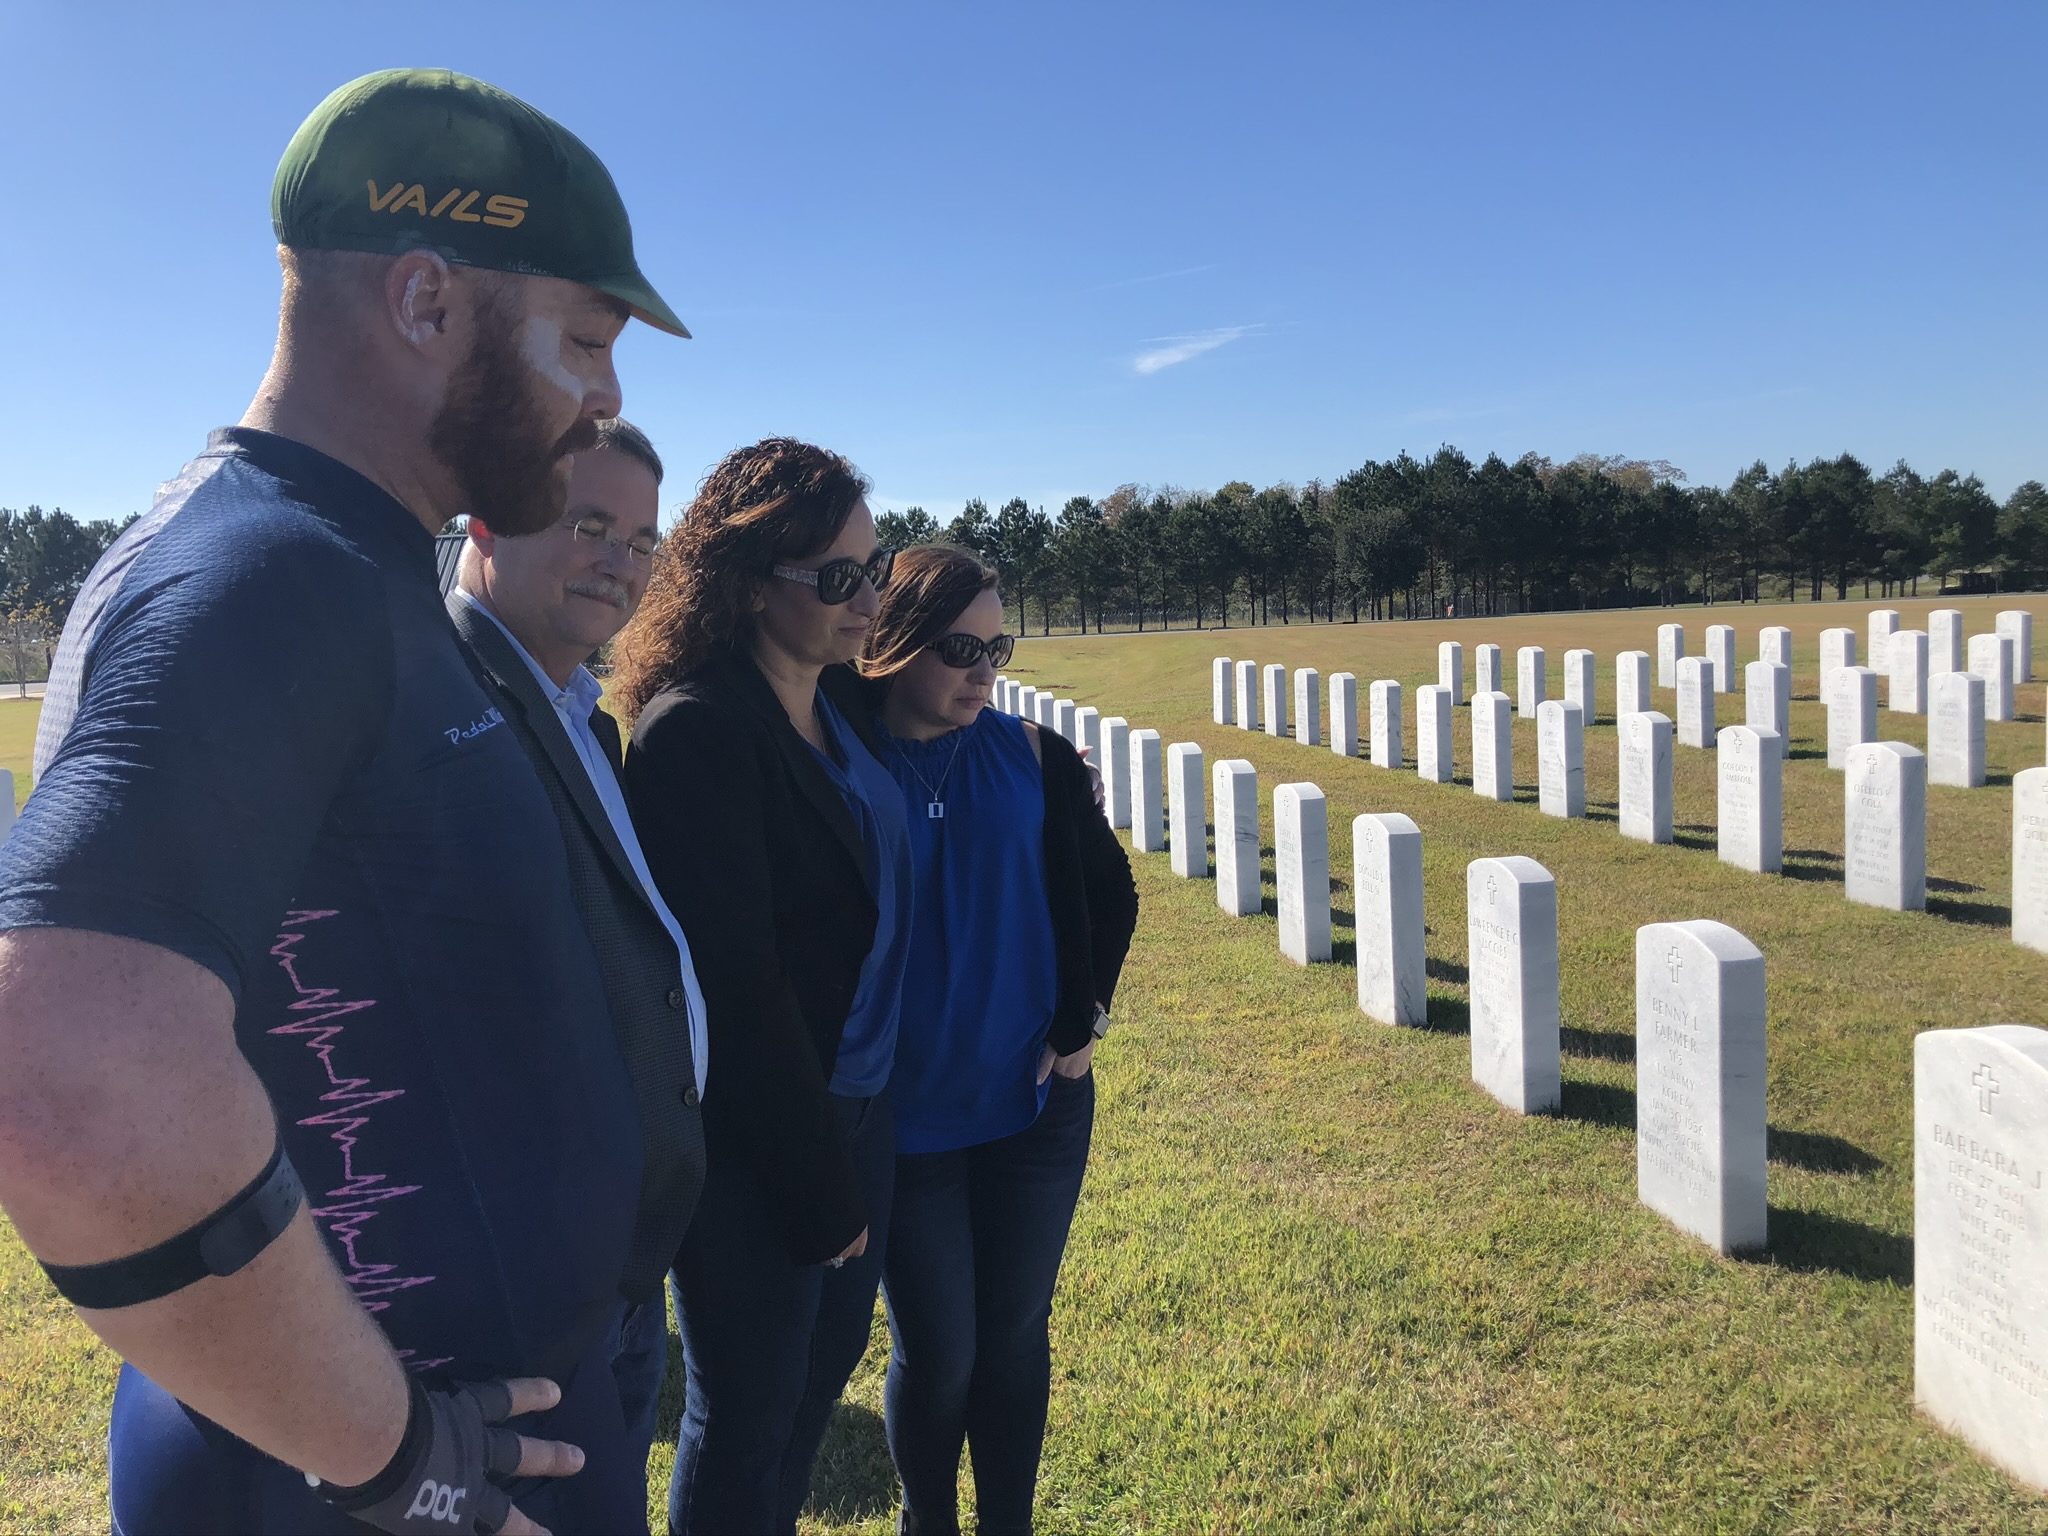 A group of people stand in a cemetery